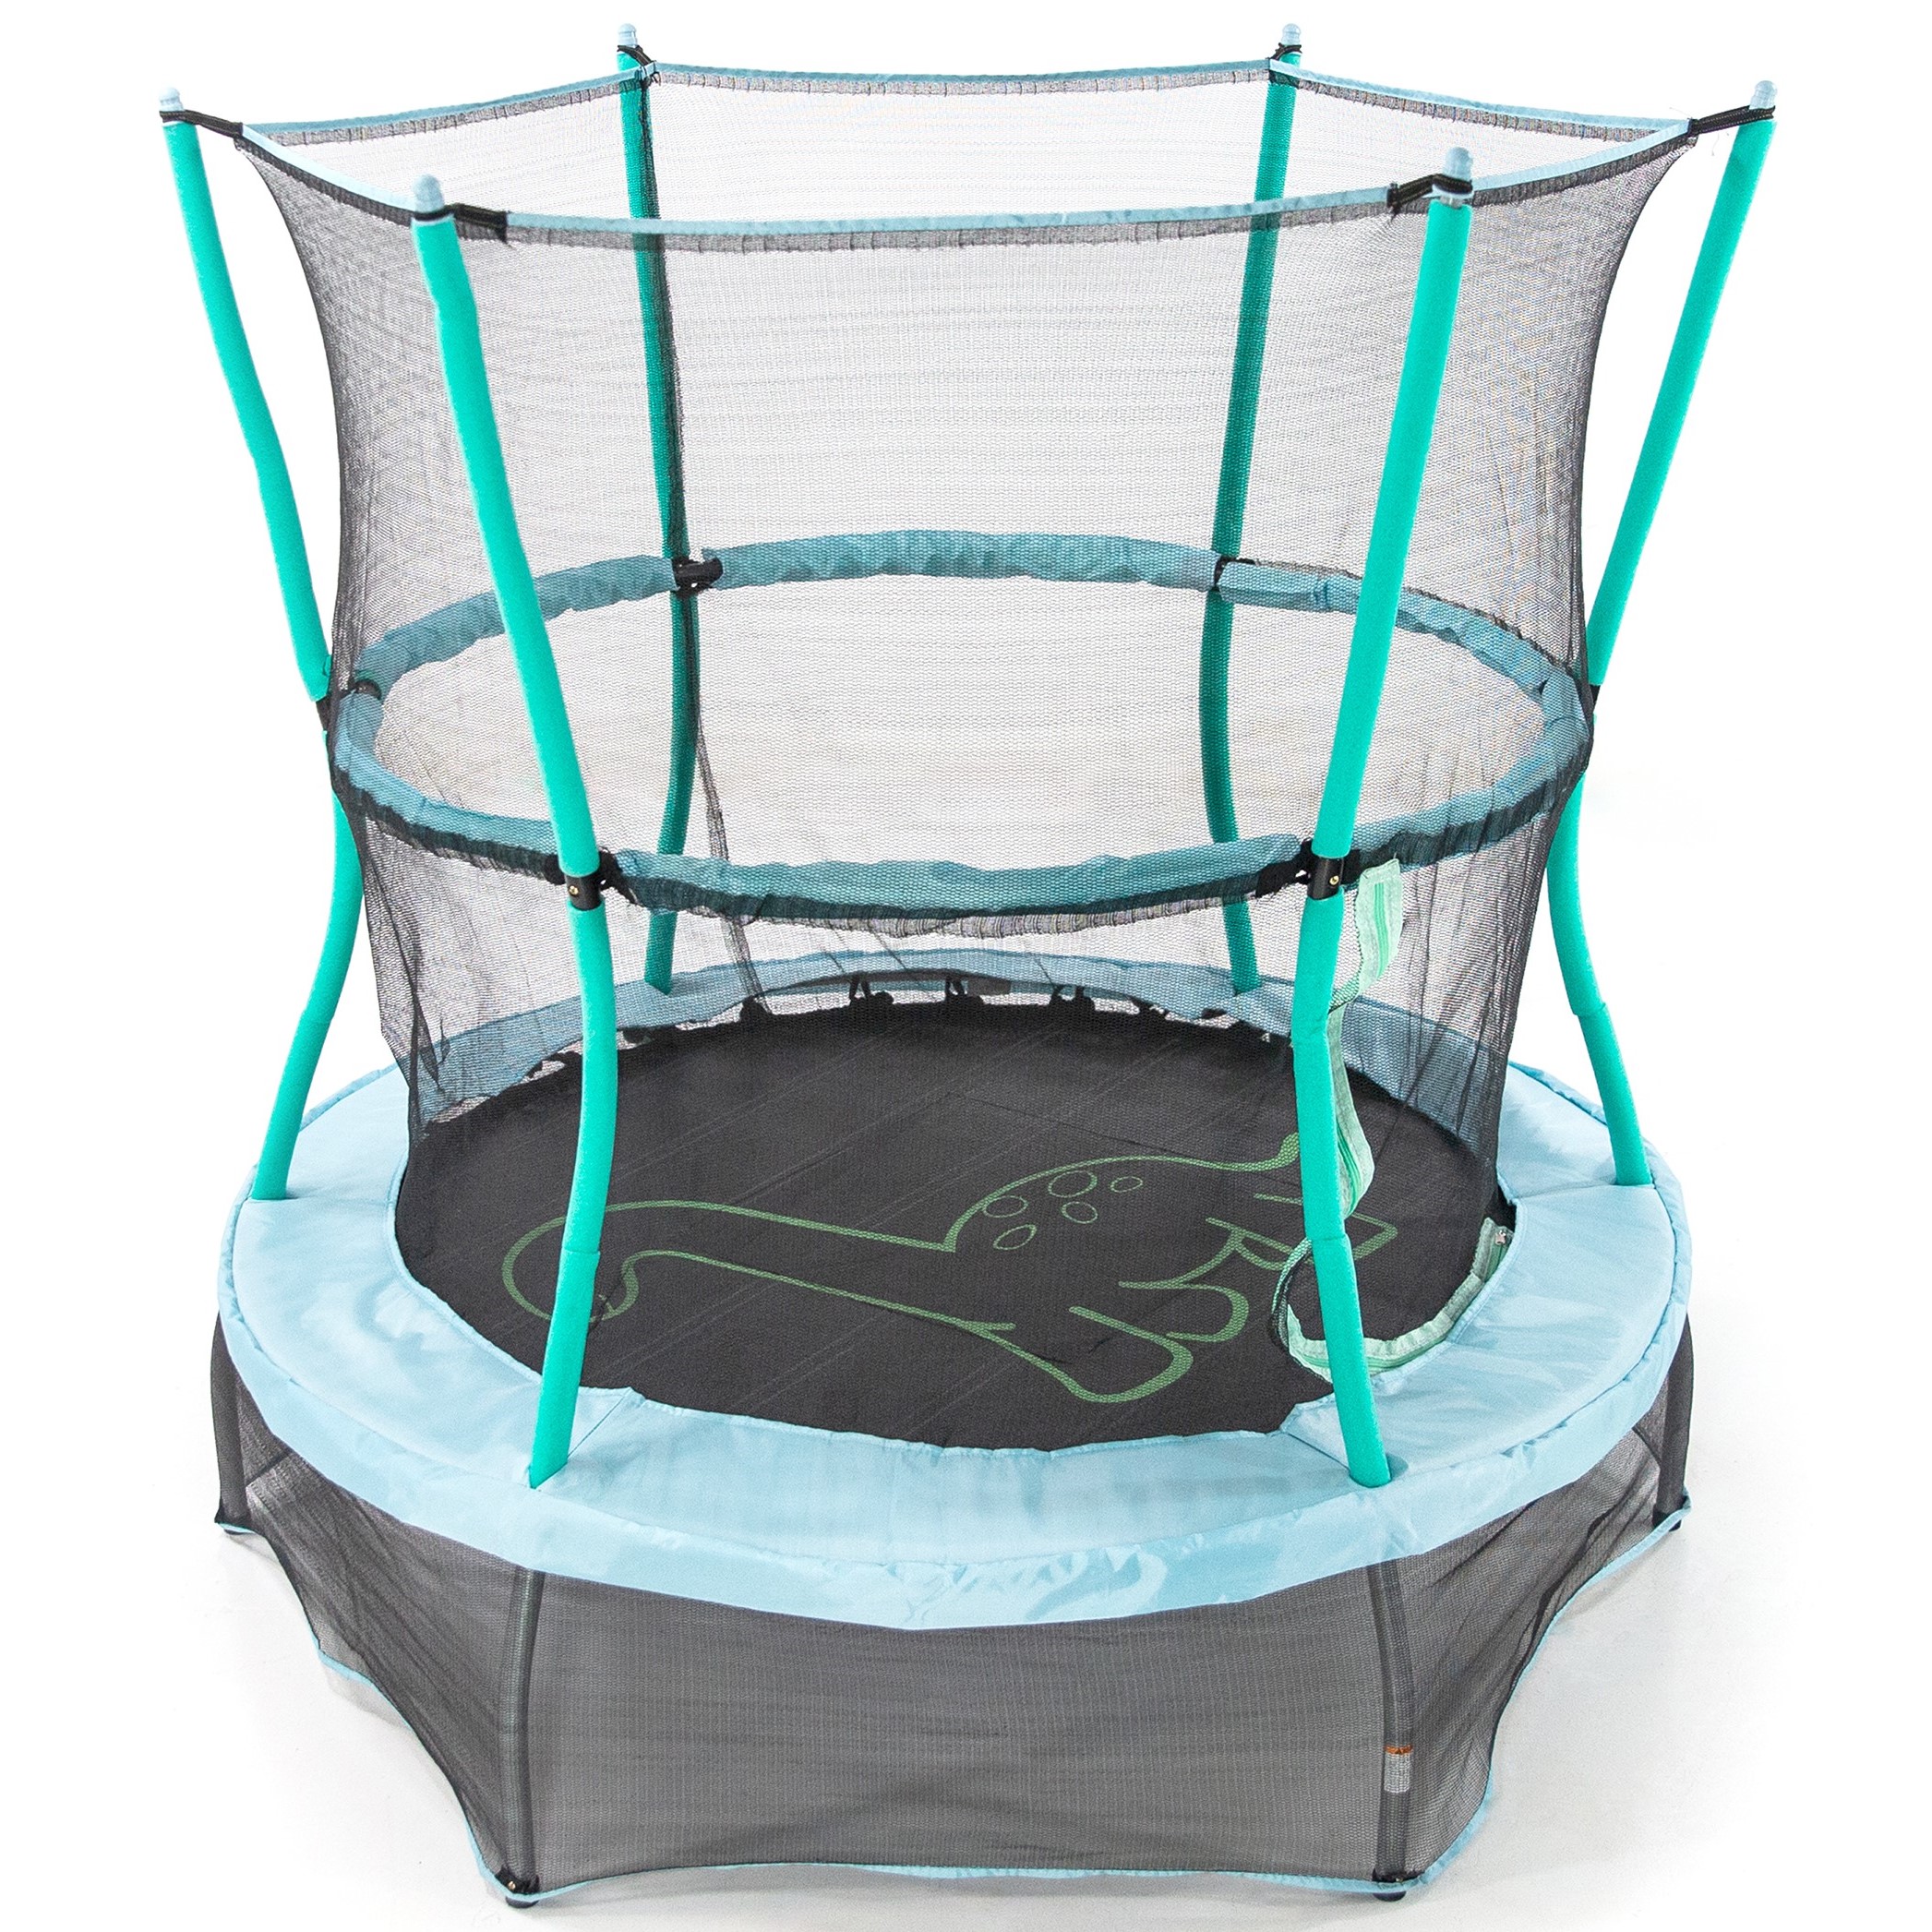 Skywalker Trampolines 55-Inch Bounce-N-Learn Trampoline, with Enclosure and Sound, Stomping Dinosaur - image 1 of 9